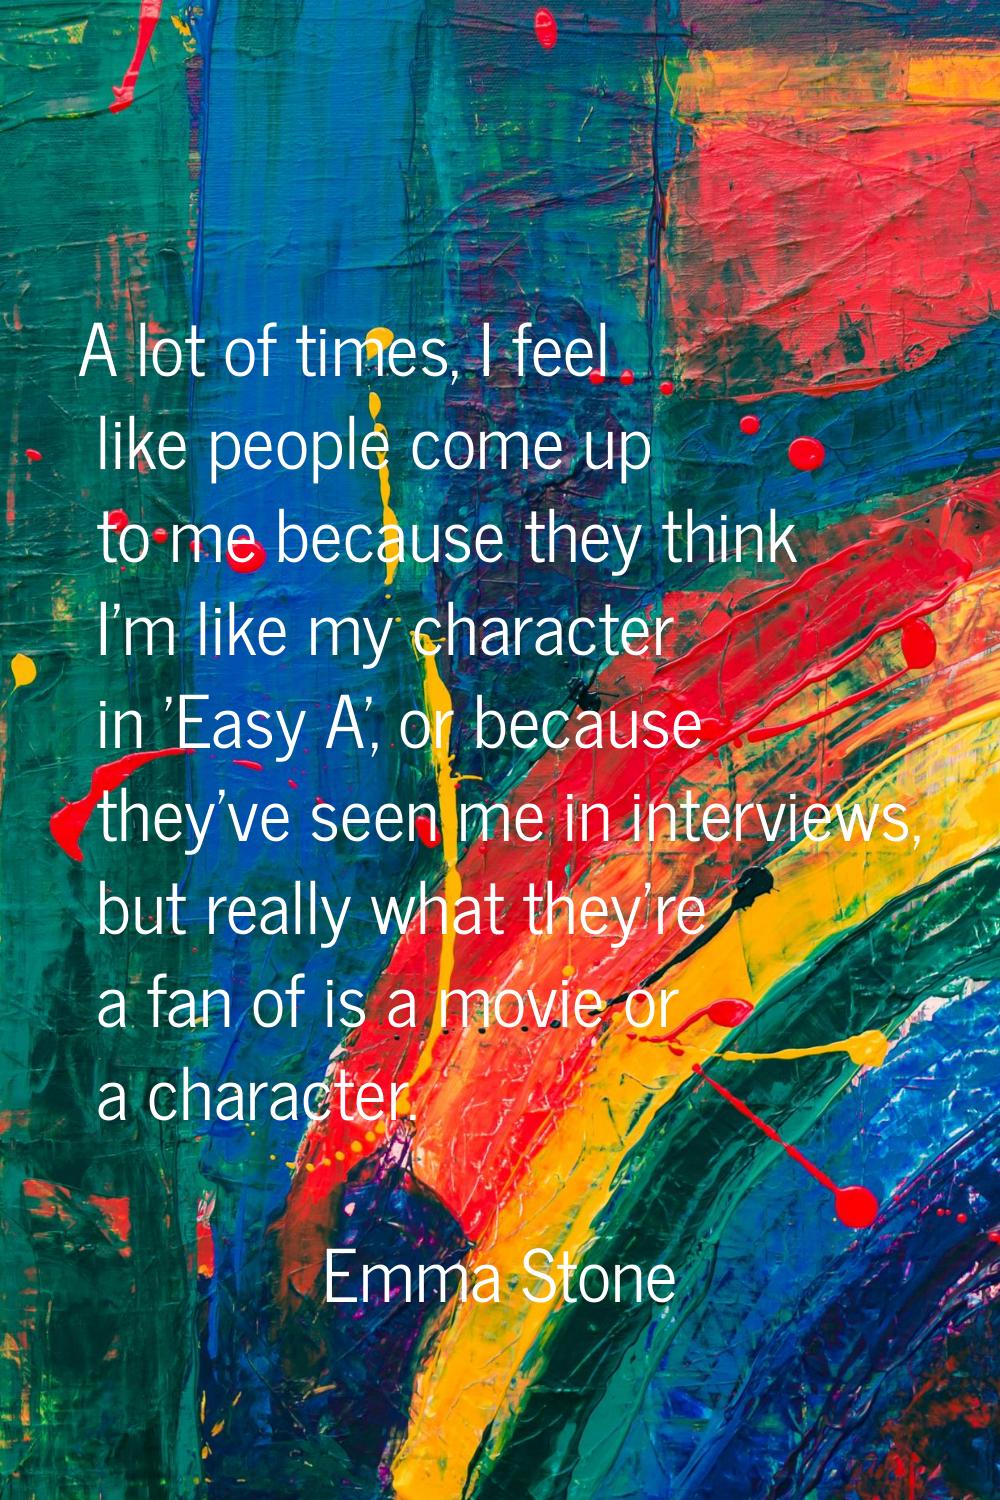 A lot of times, I feel like people come up to me because they think I'm like my character in 'Easy 